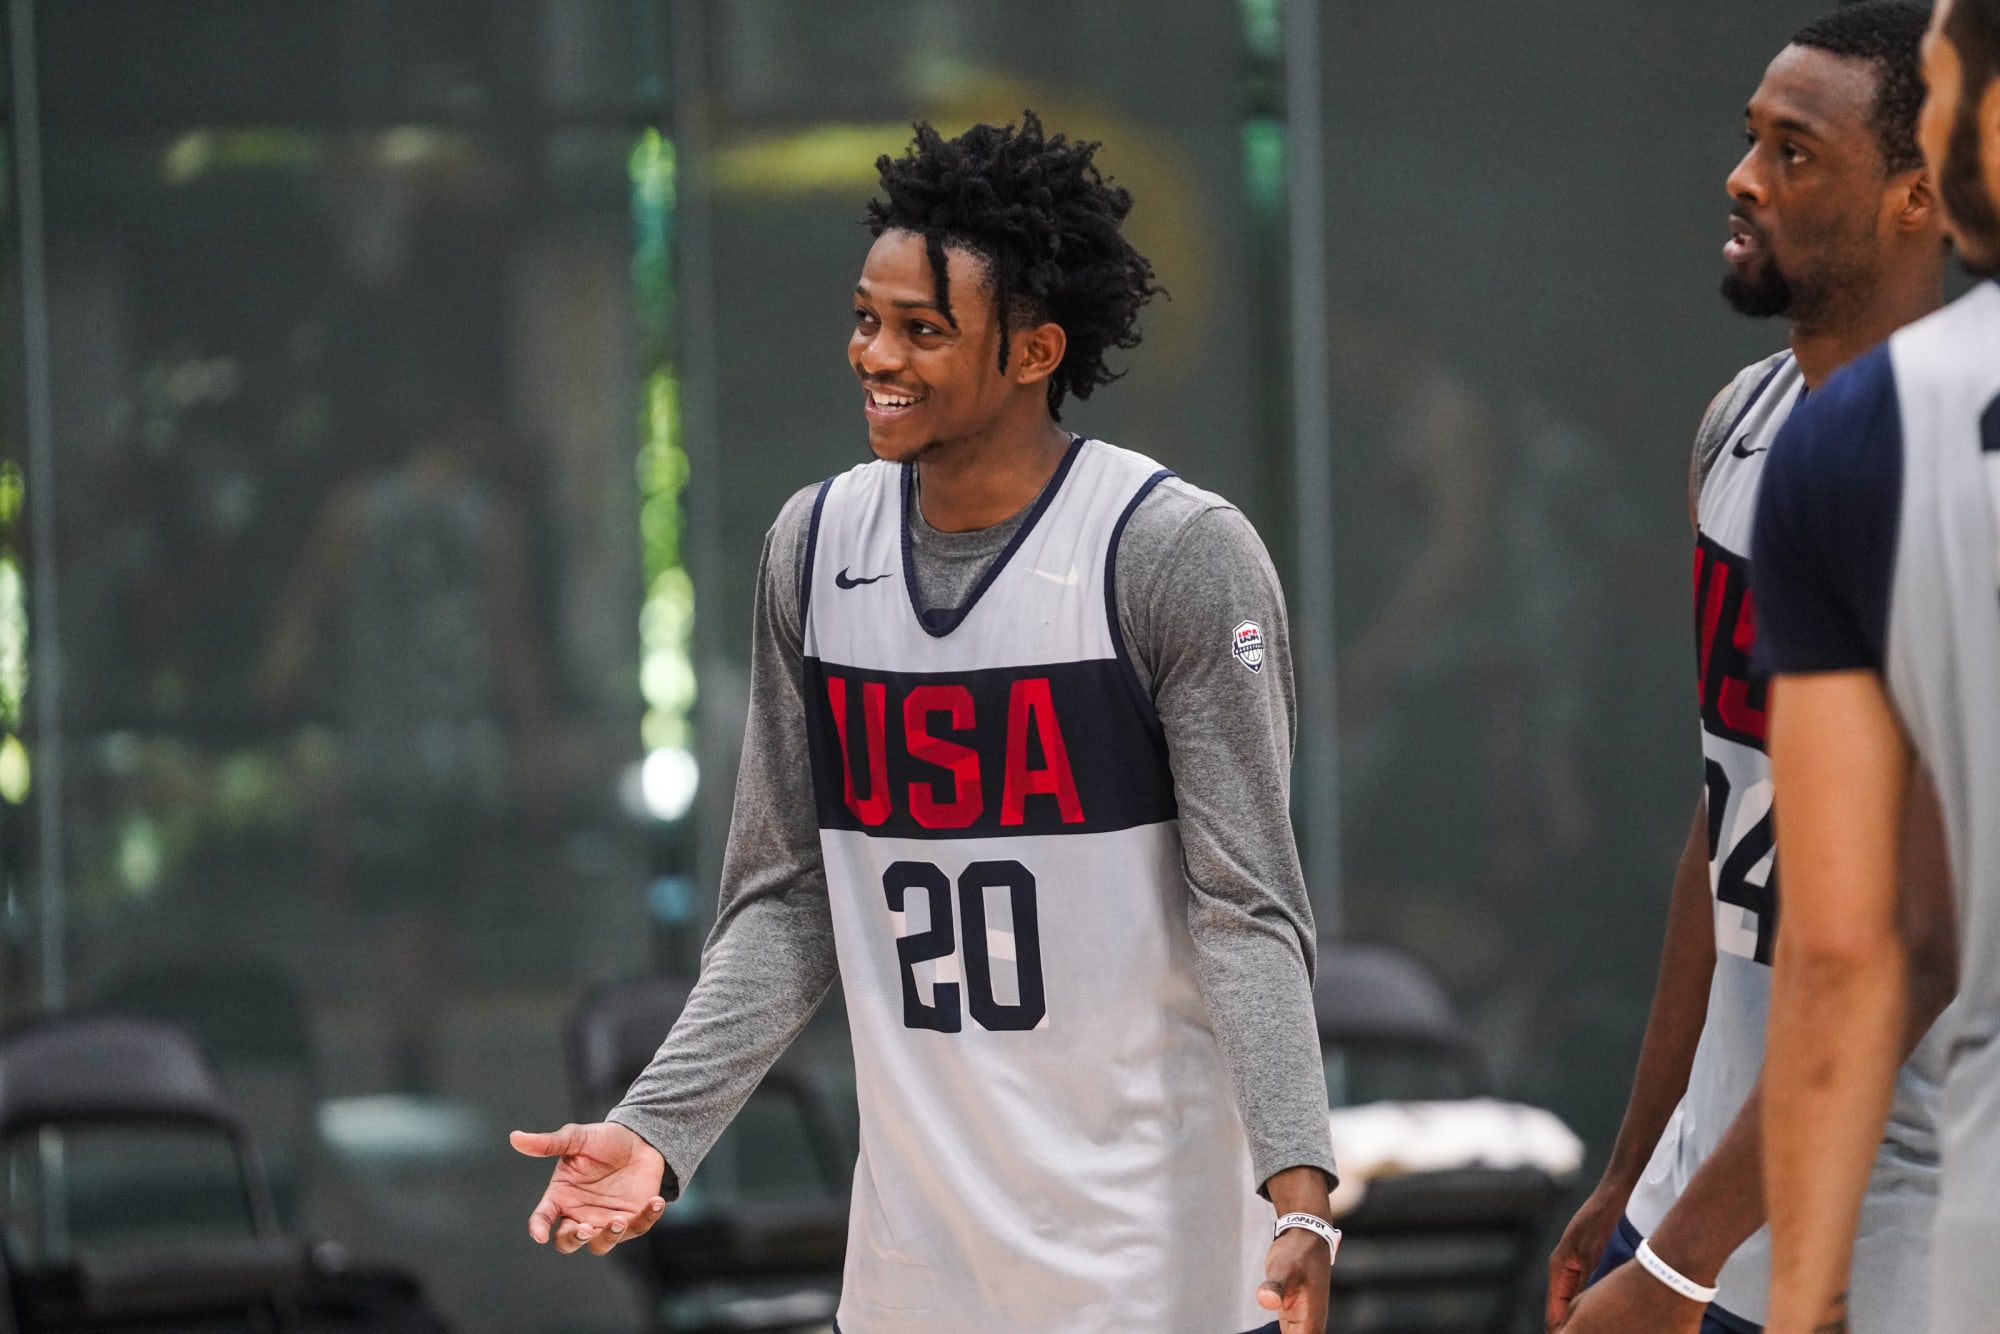 De'Aaron Fox to Under Armour is only a matter of when